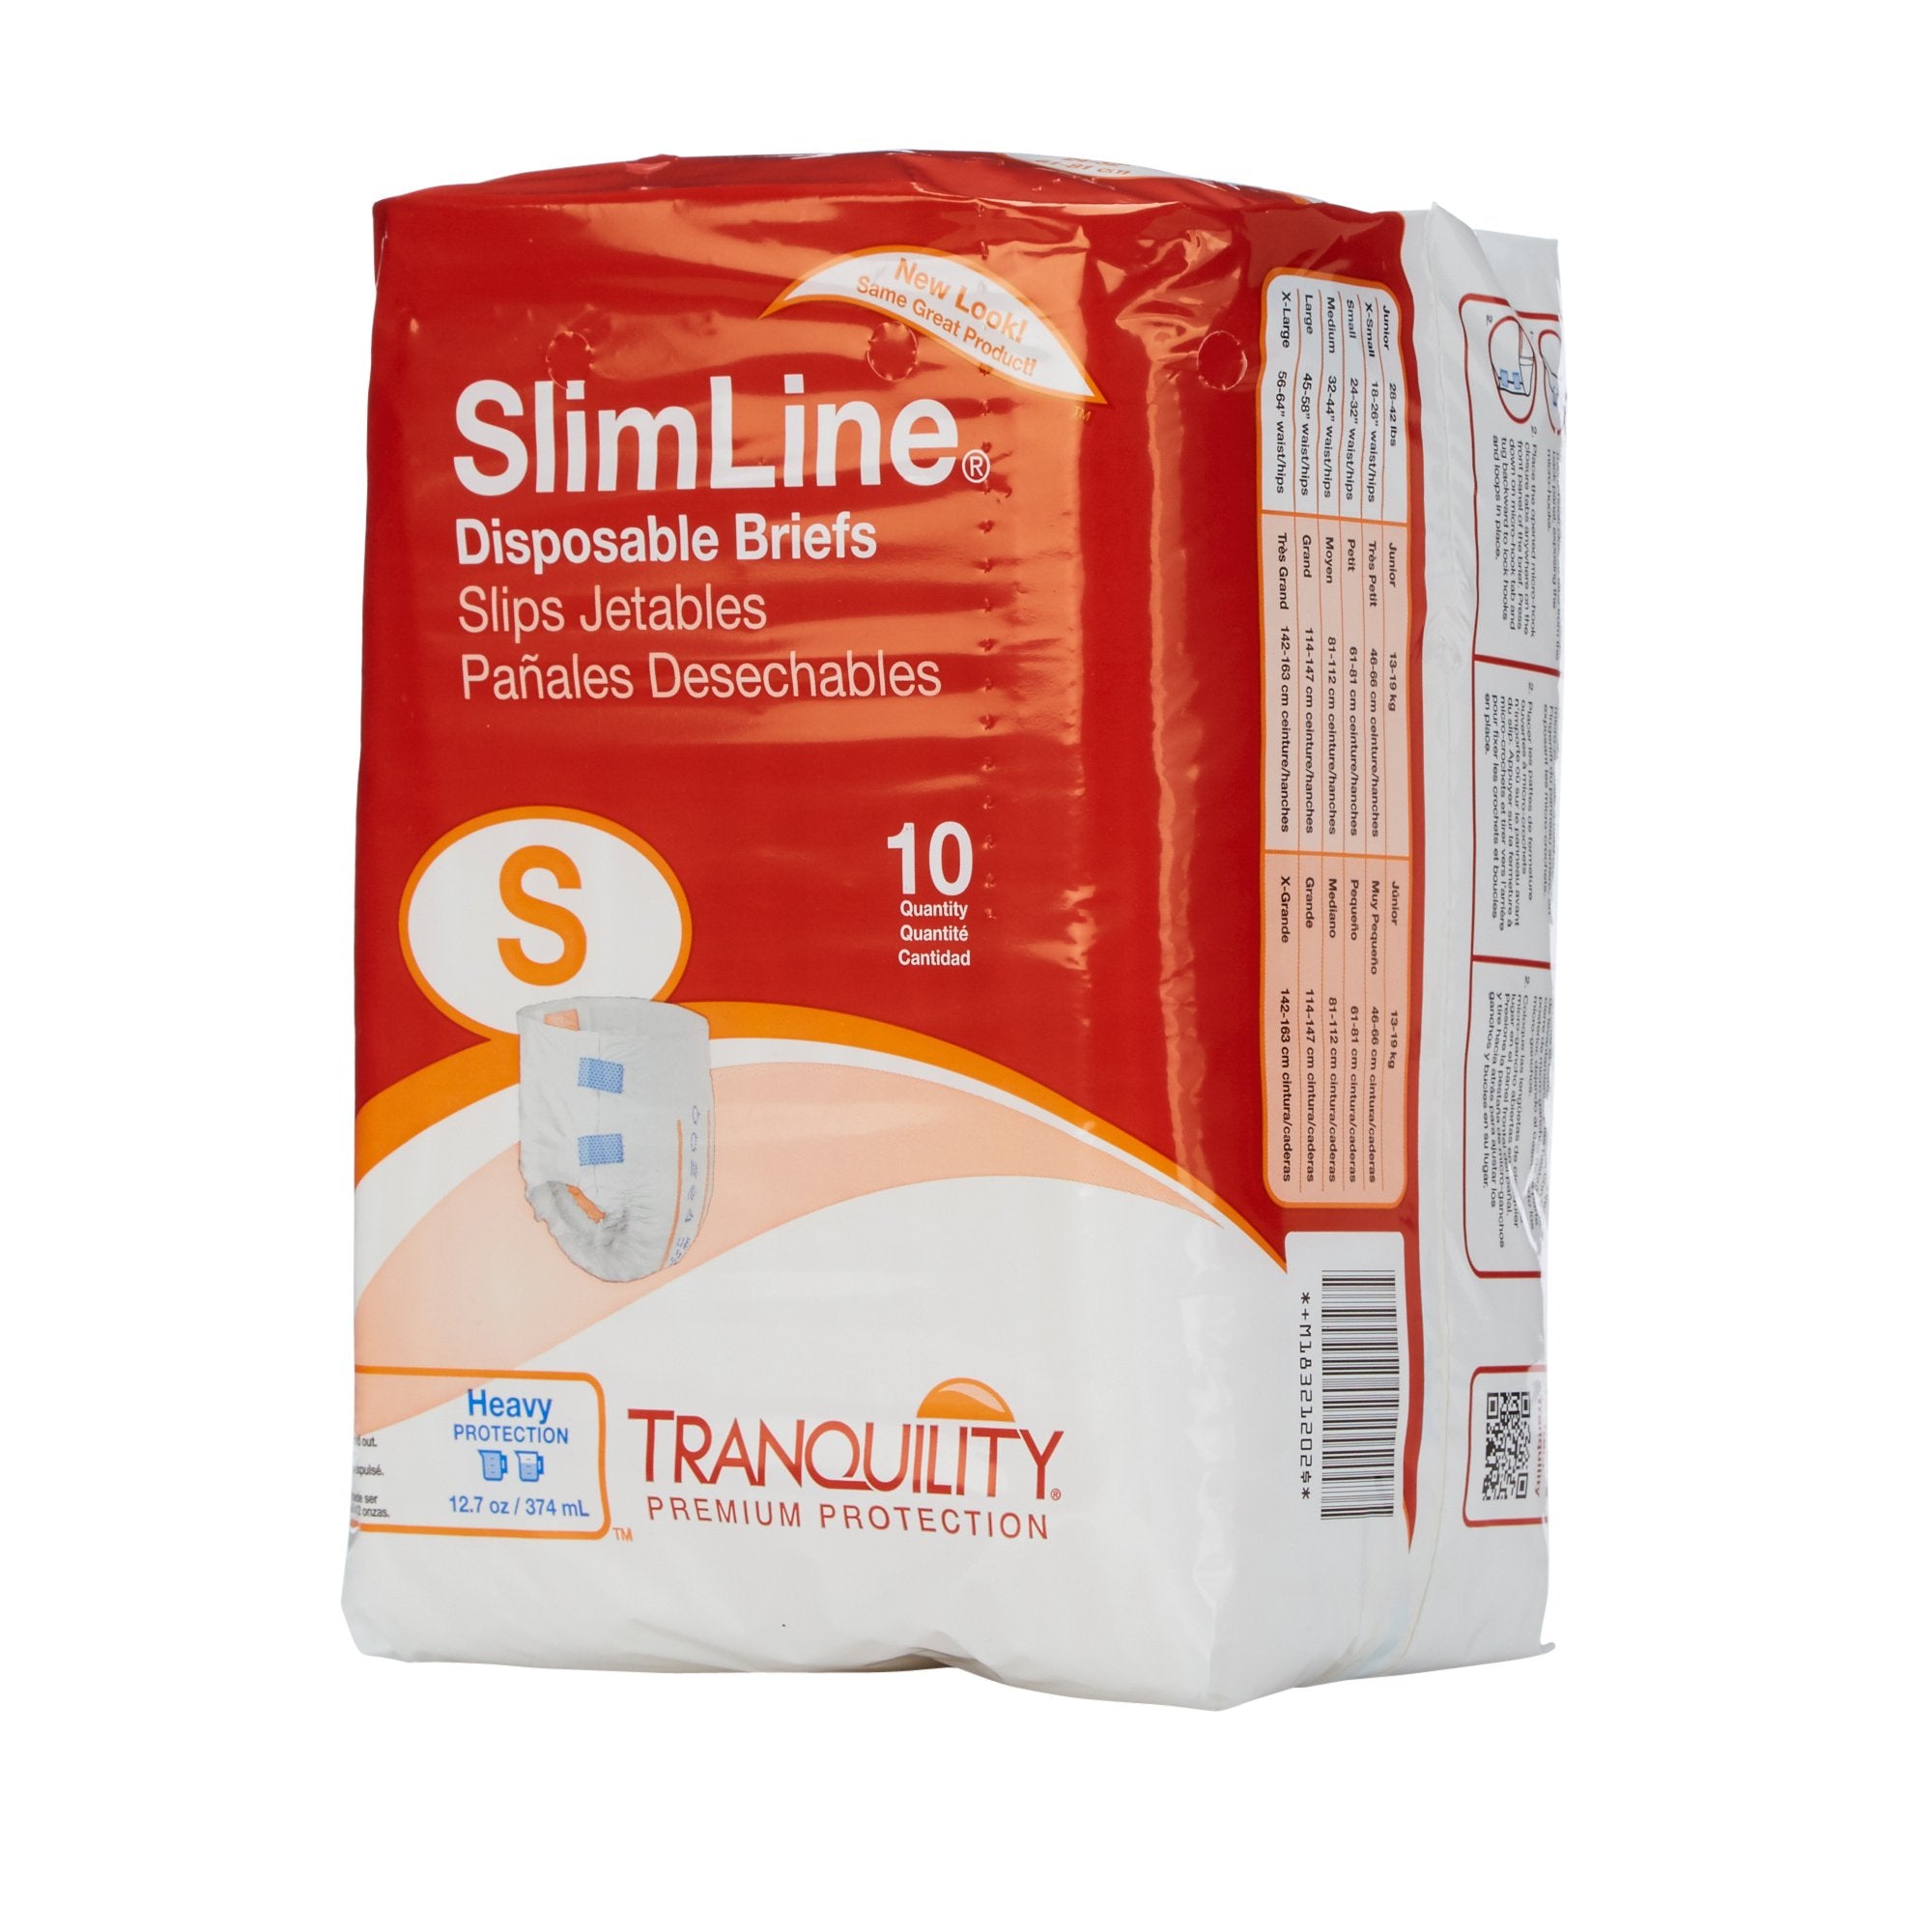 Unisex Adult Incontinence Brief Tranquility Slimline Small Disposable Heavy Absorbency